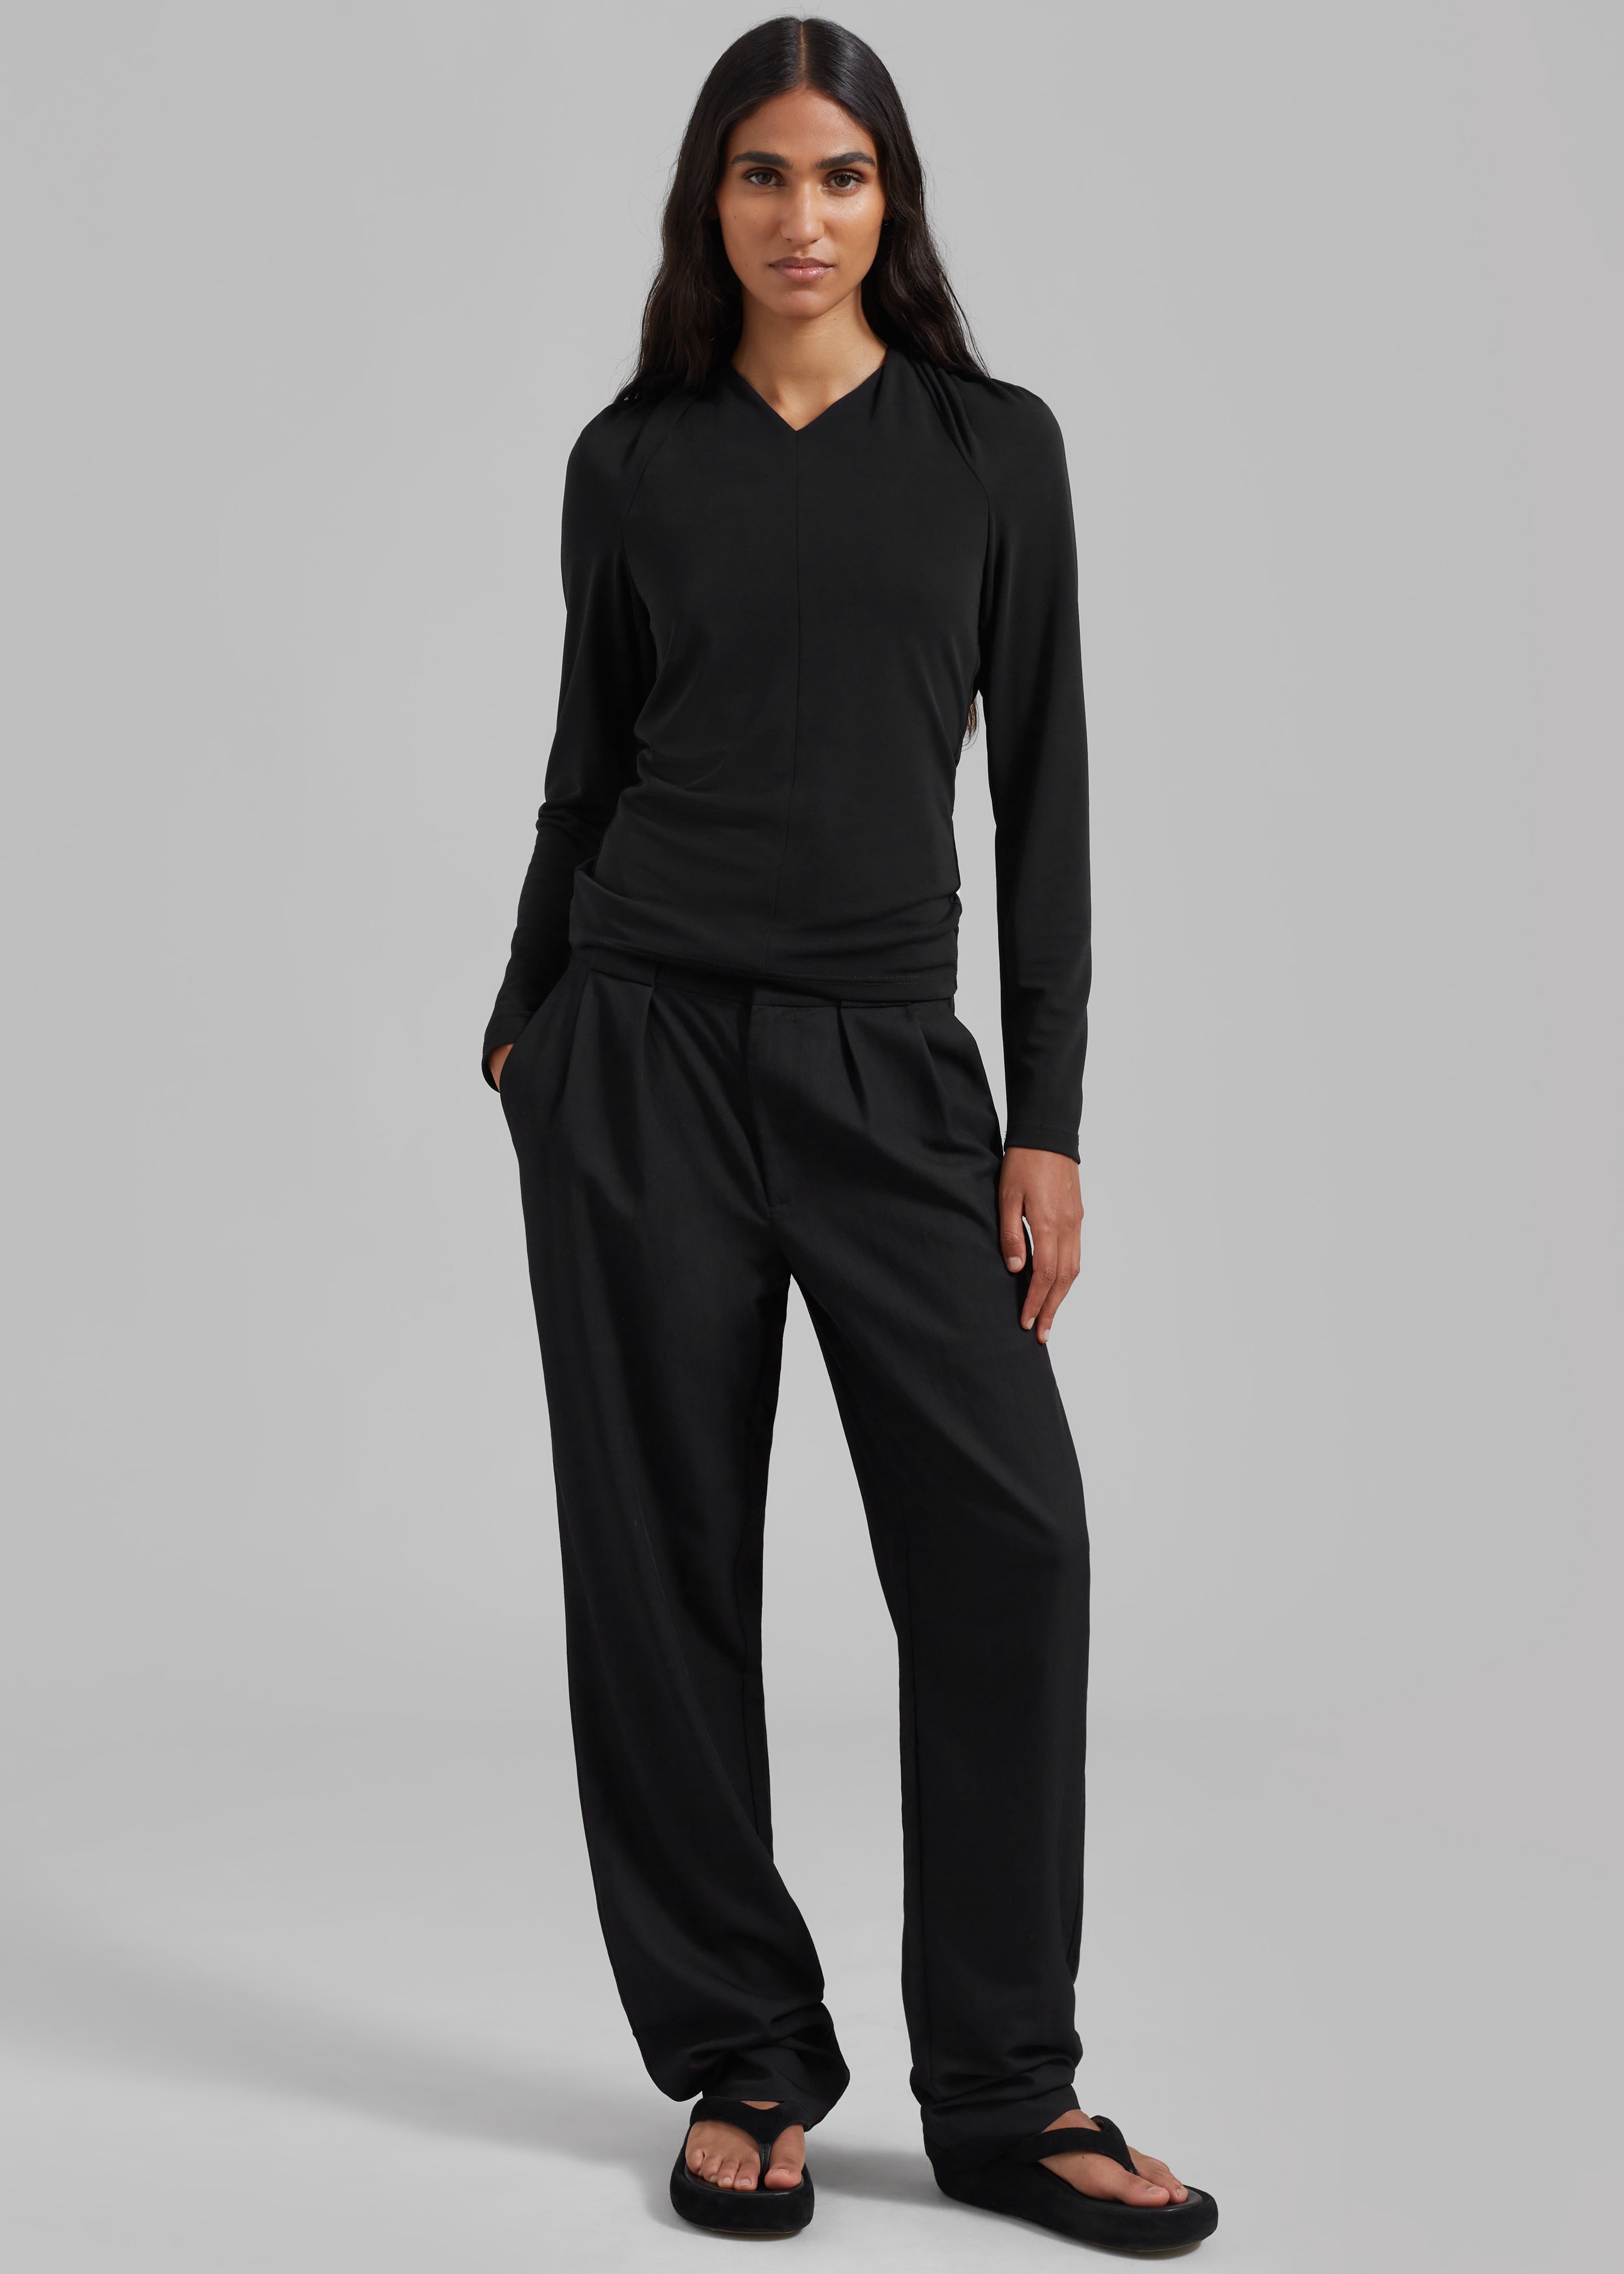 Proenza Schouler White Label Drapey Suiting Trousers - Black - 1